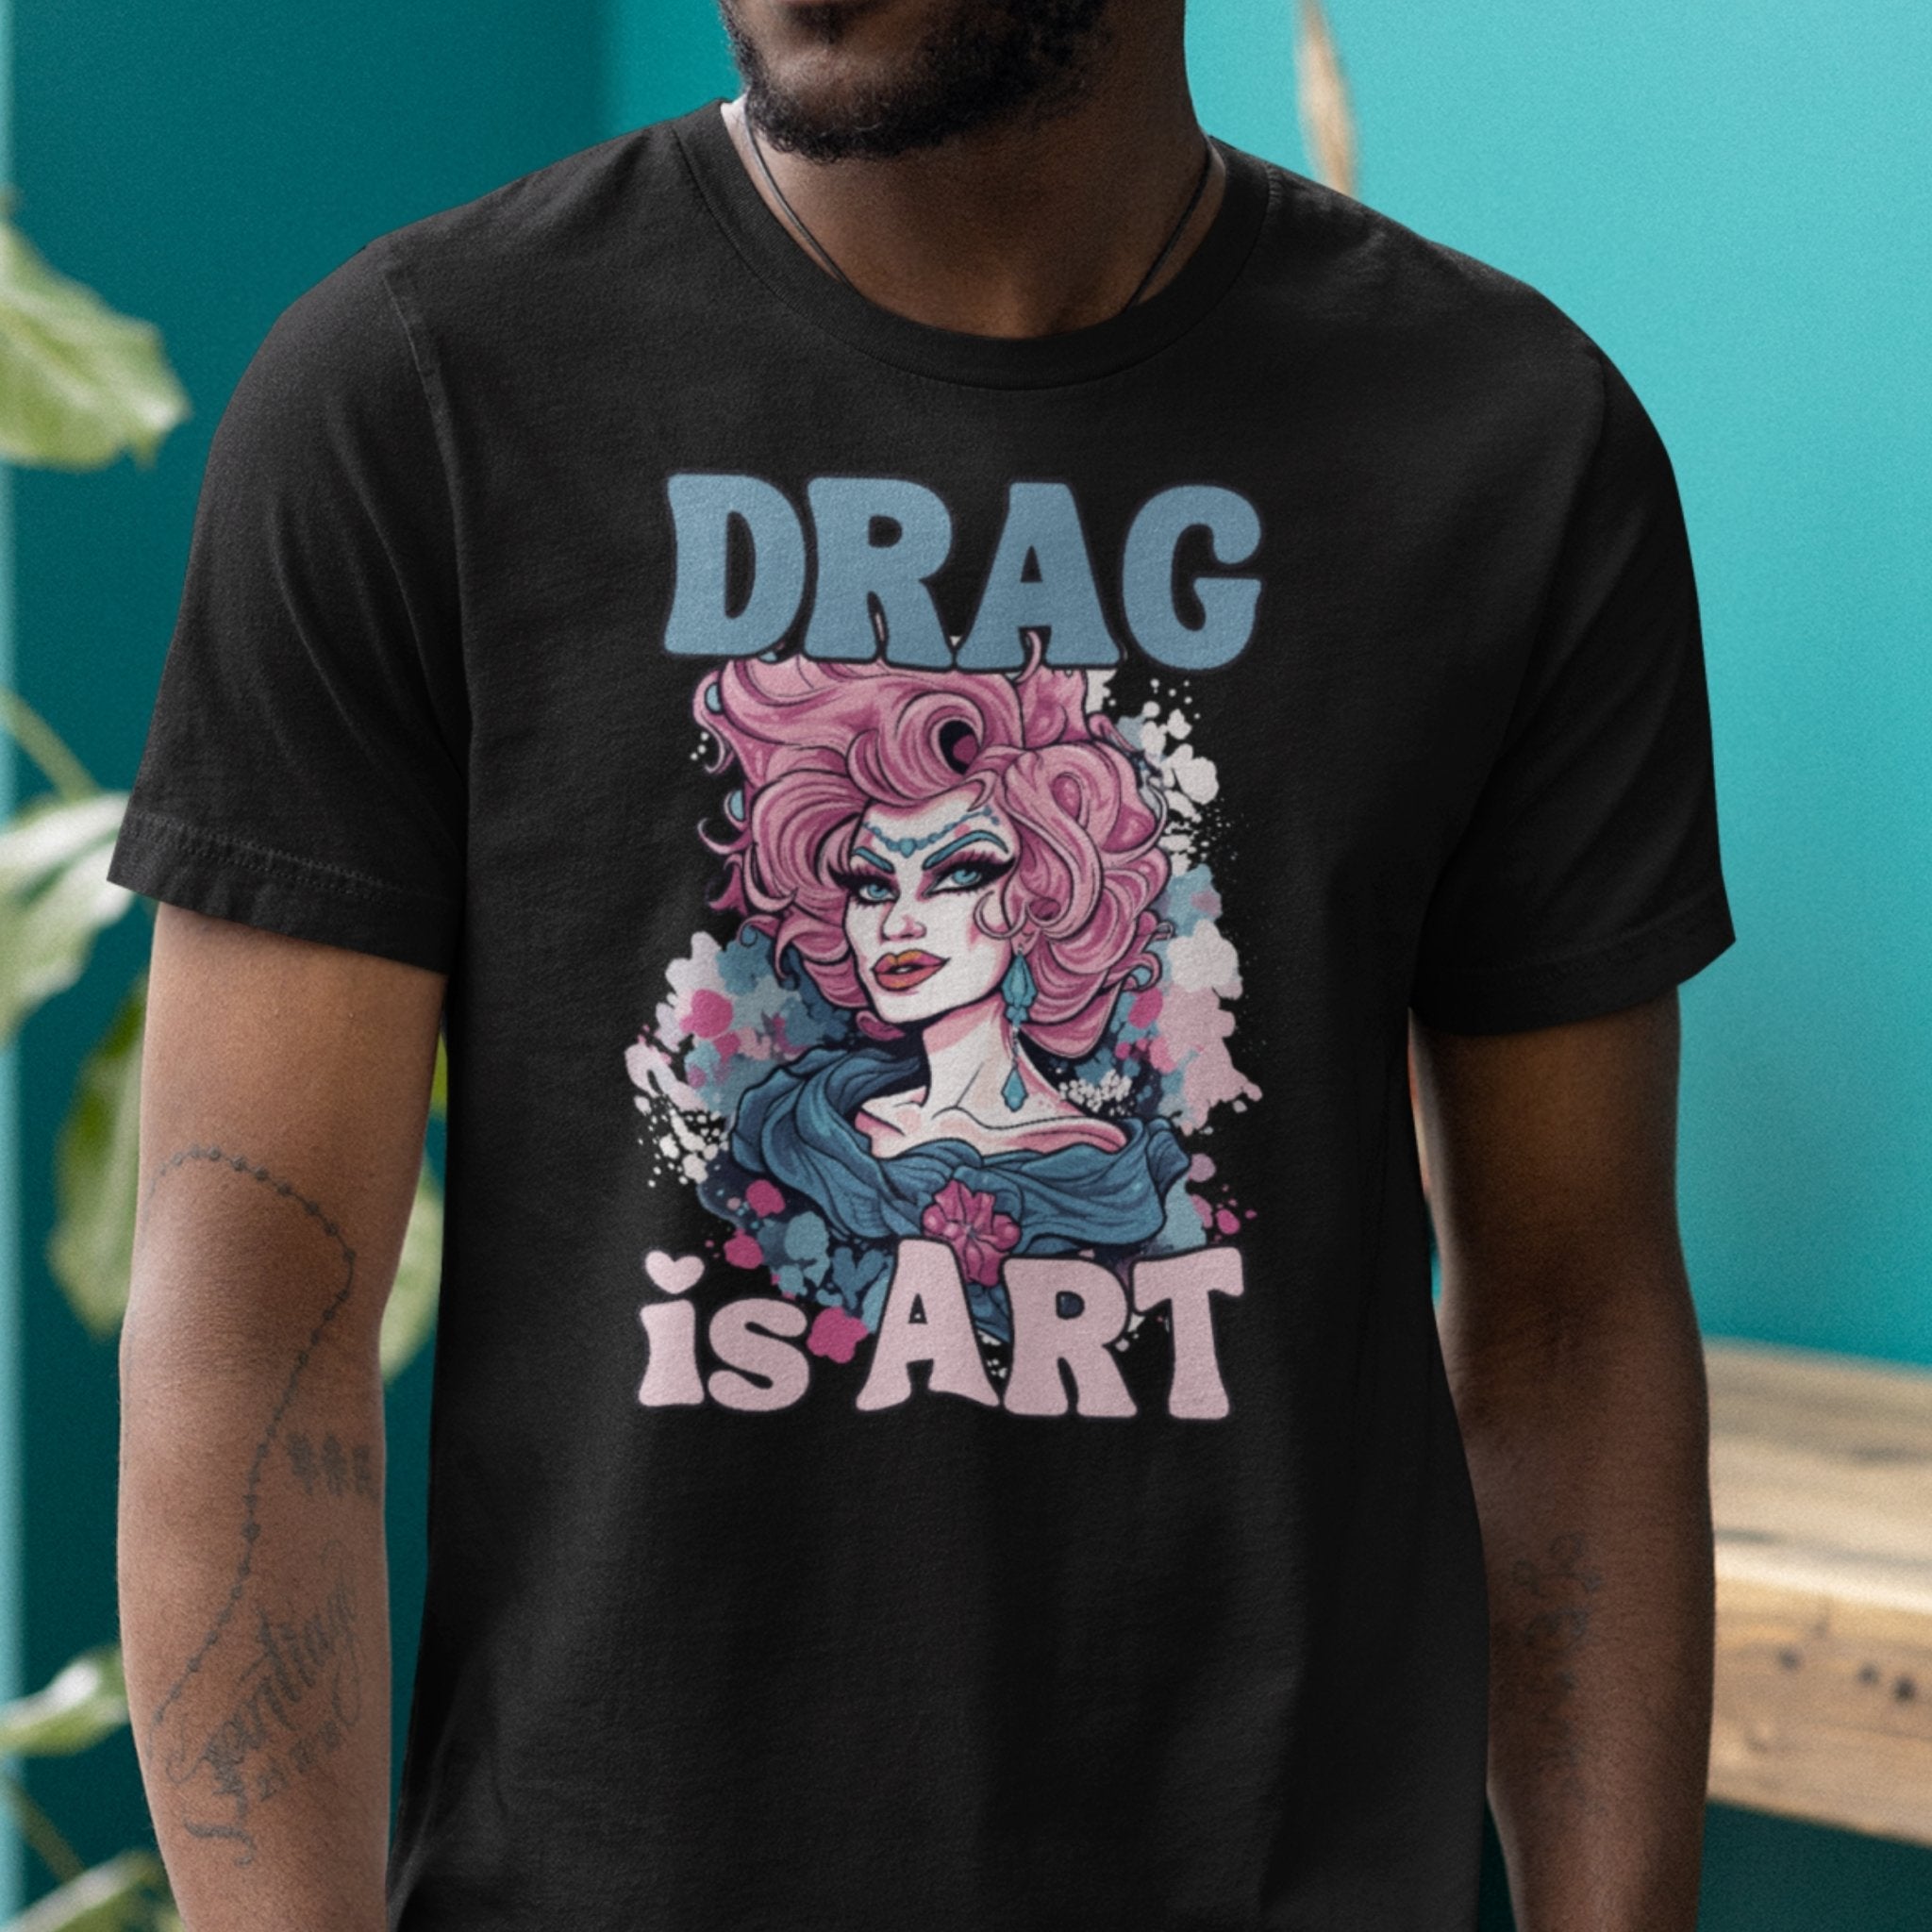 Drag is ART - Protest the Drag Ban T-Shirt